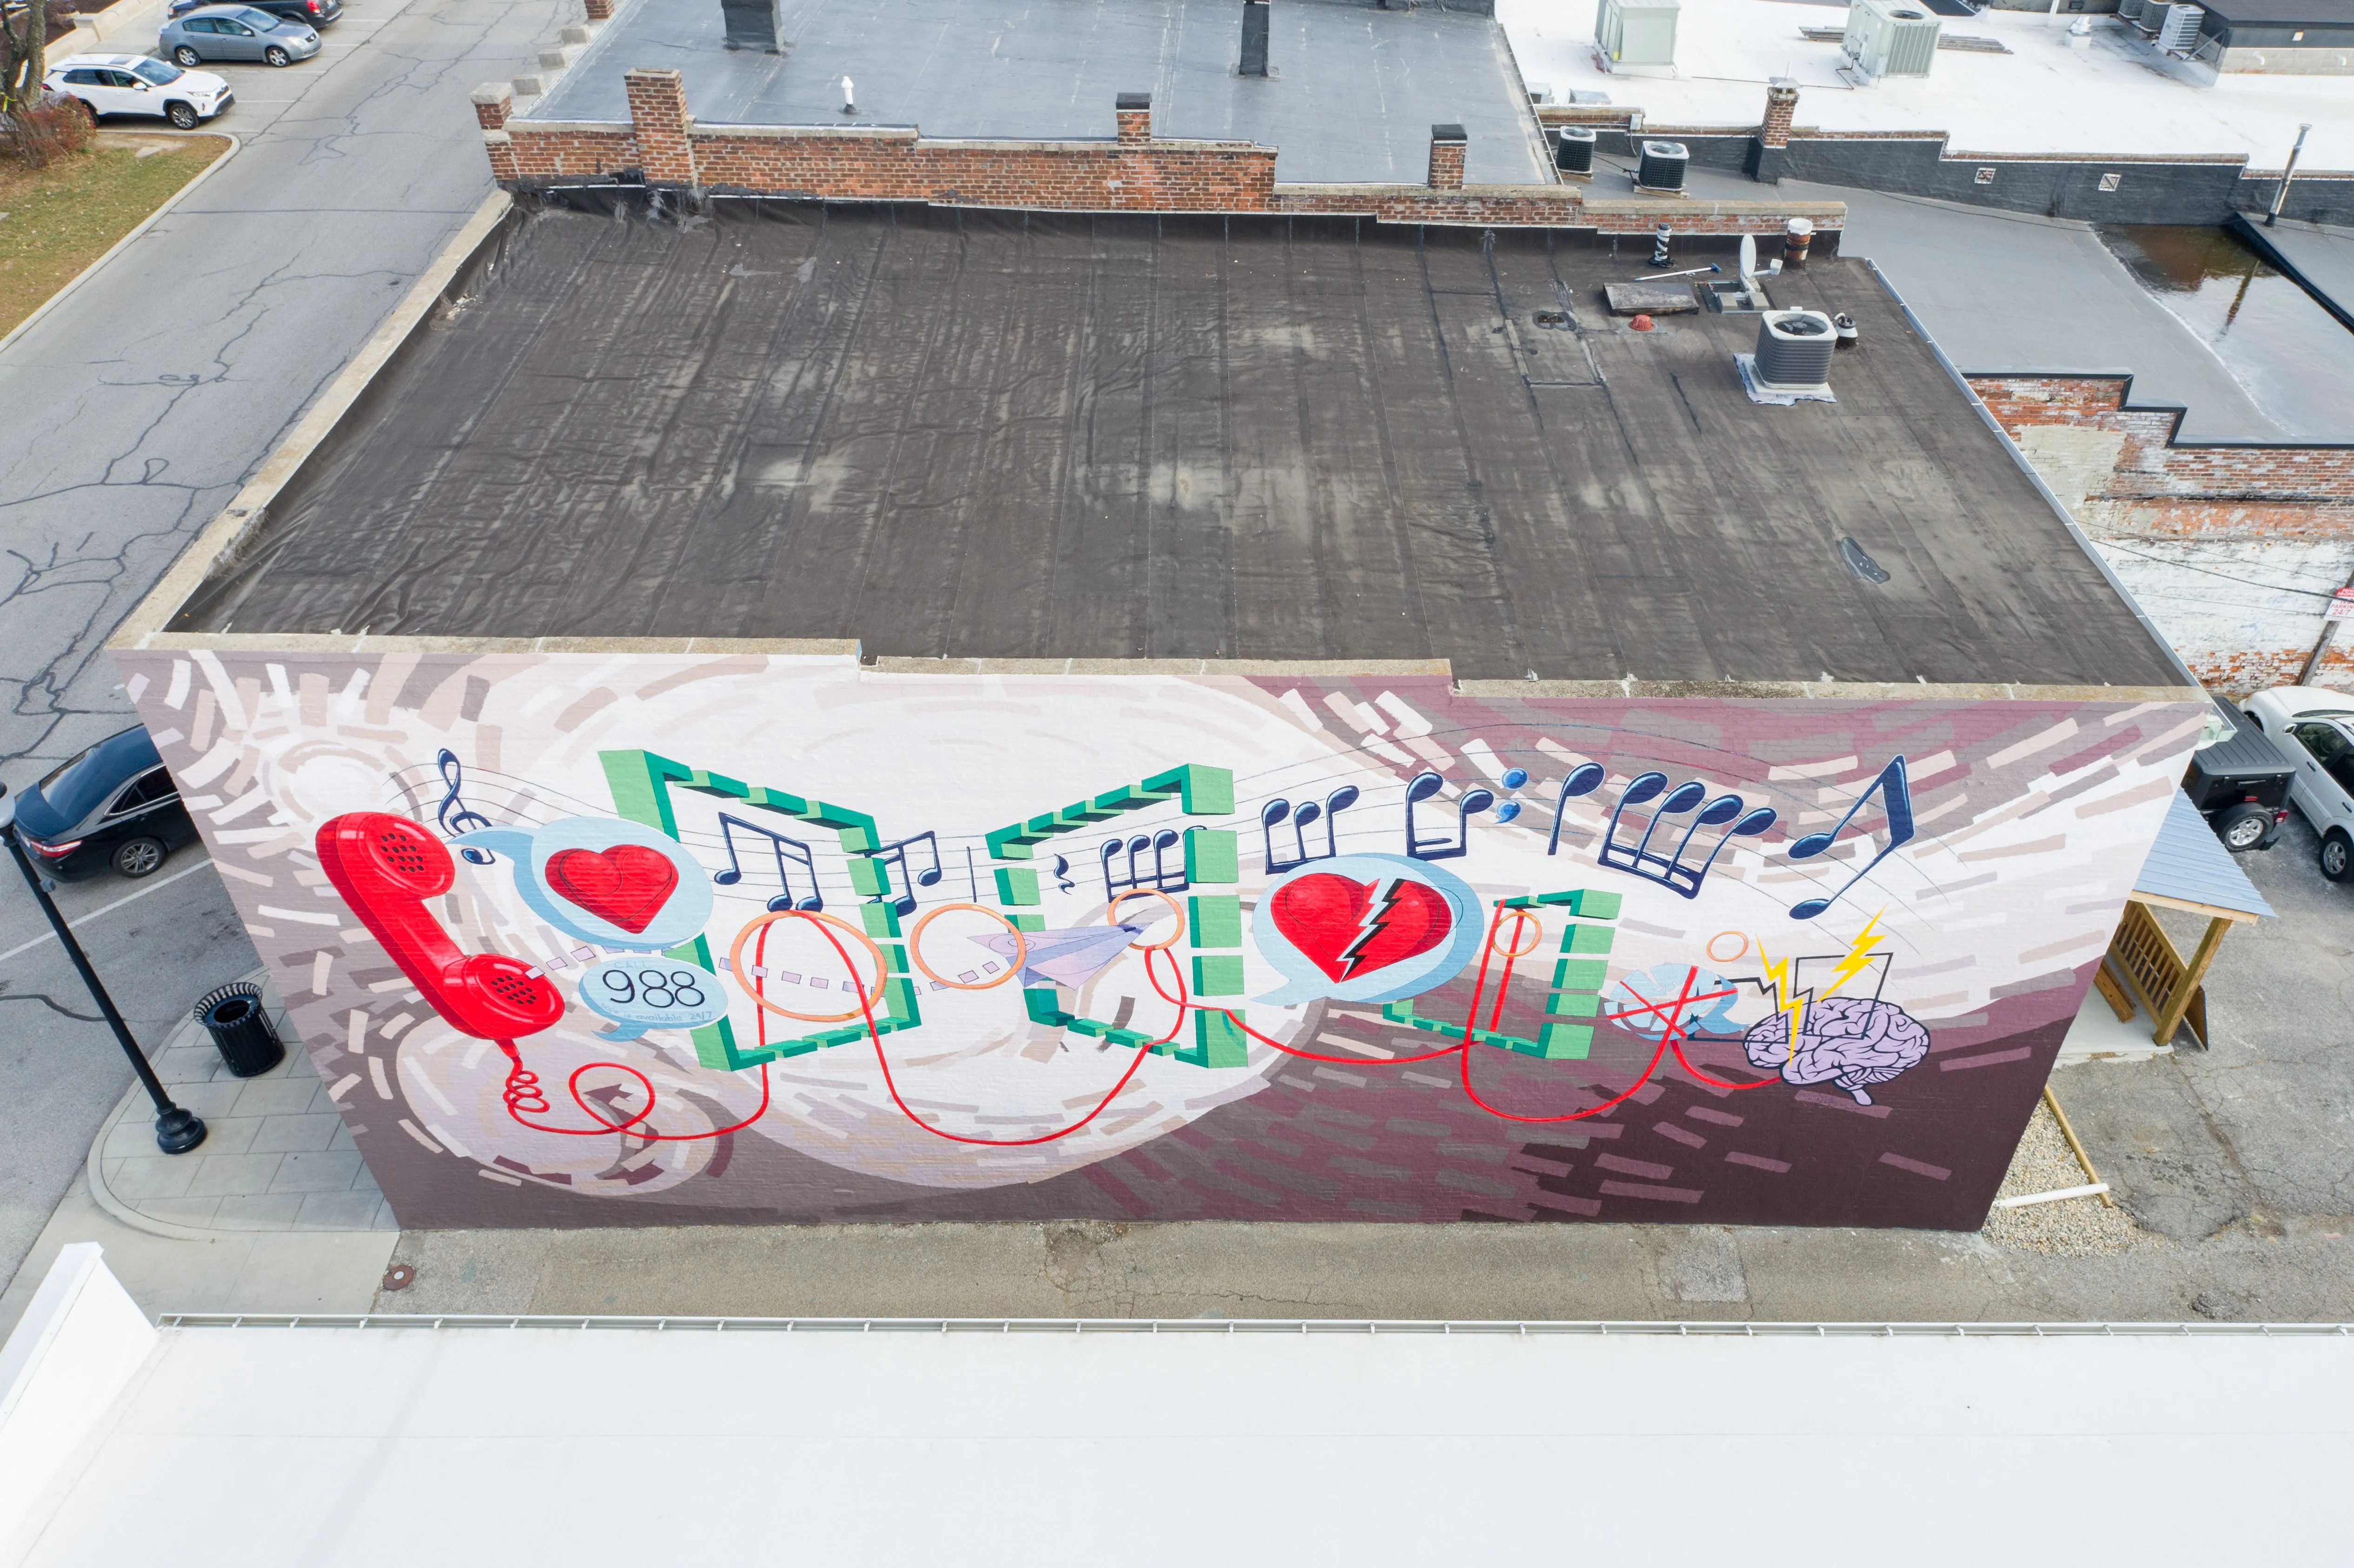 Aerial view of a rooftop with a colorful mural featuring musical notes and hearts.